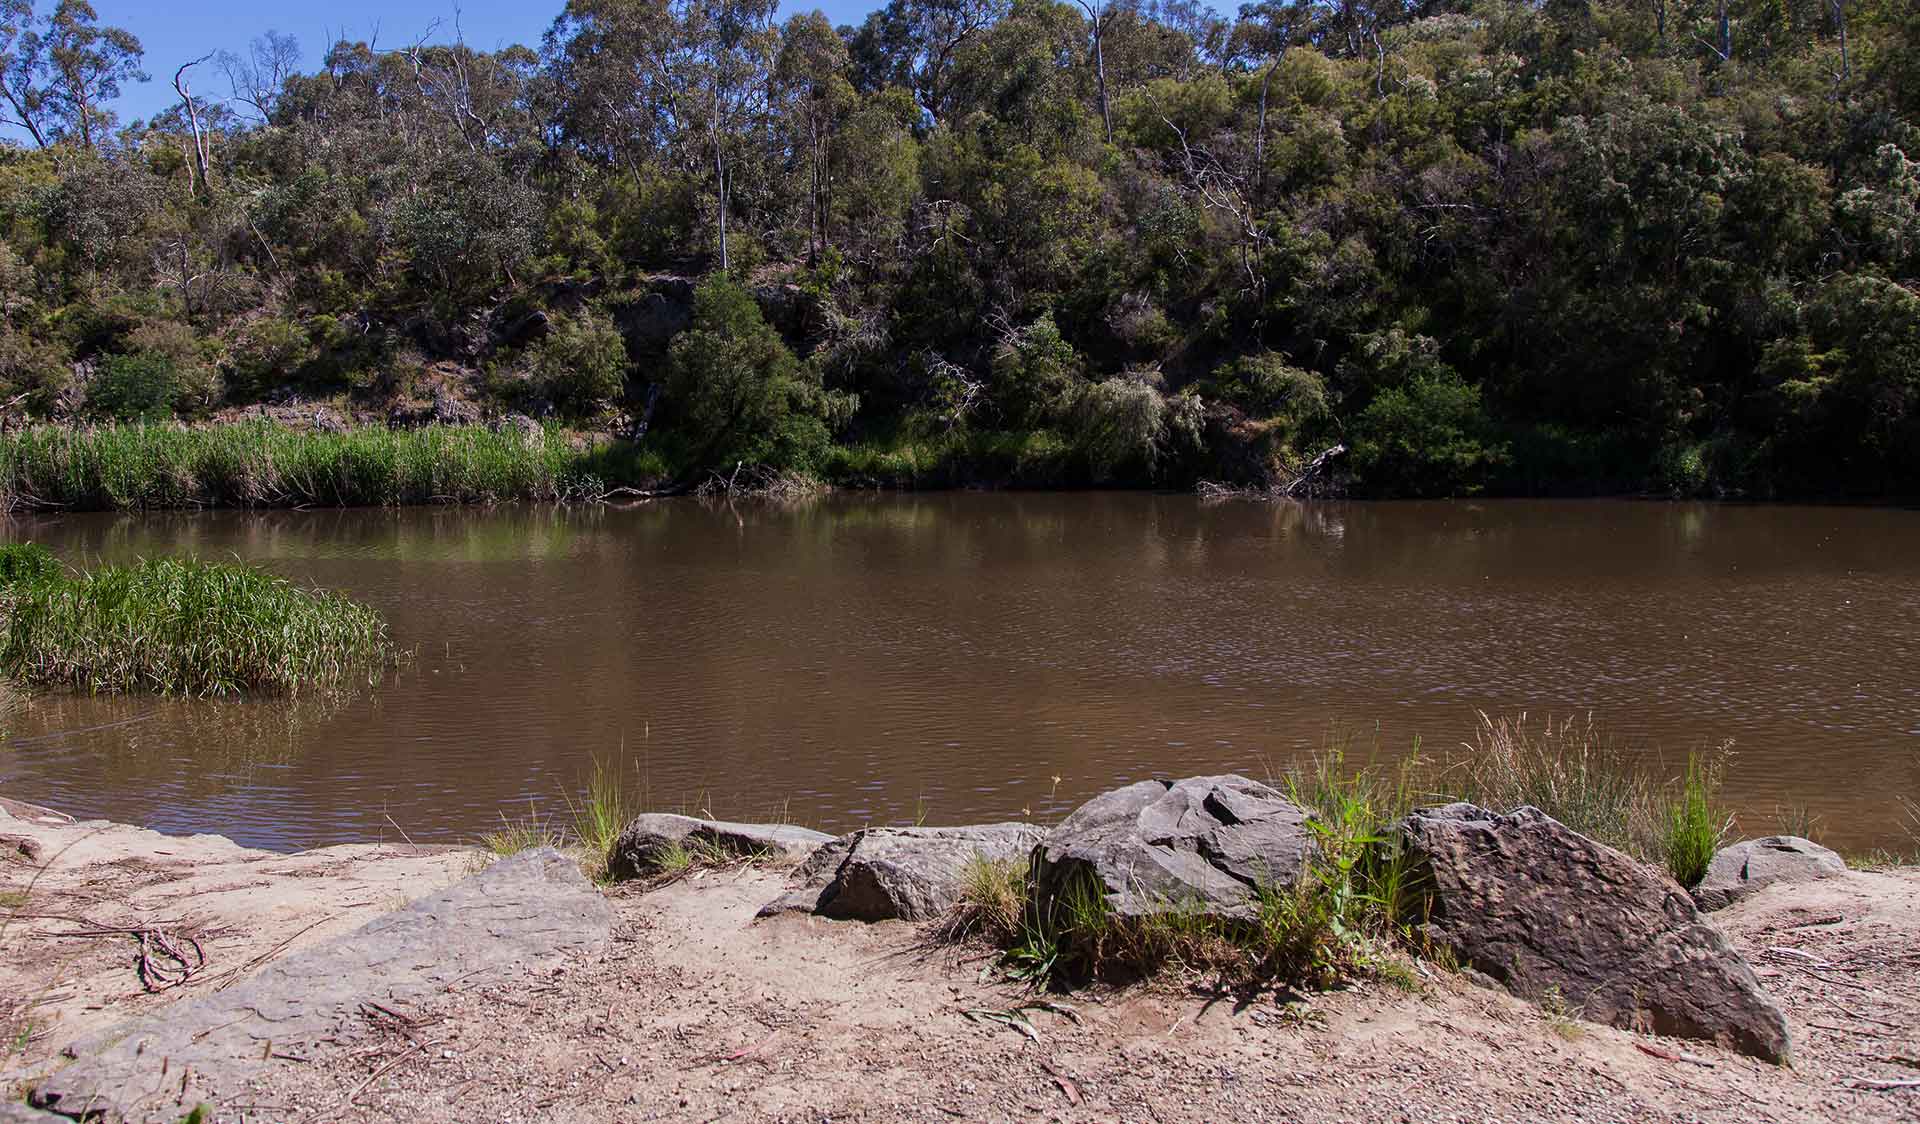 The canoe launch at the edge of the Yarra River at Jumping Creek Reserve in the Warrandyte State Park